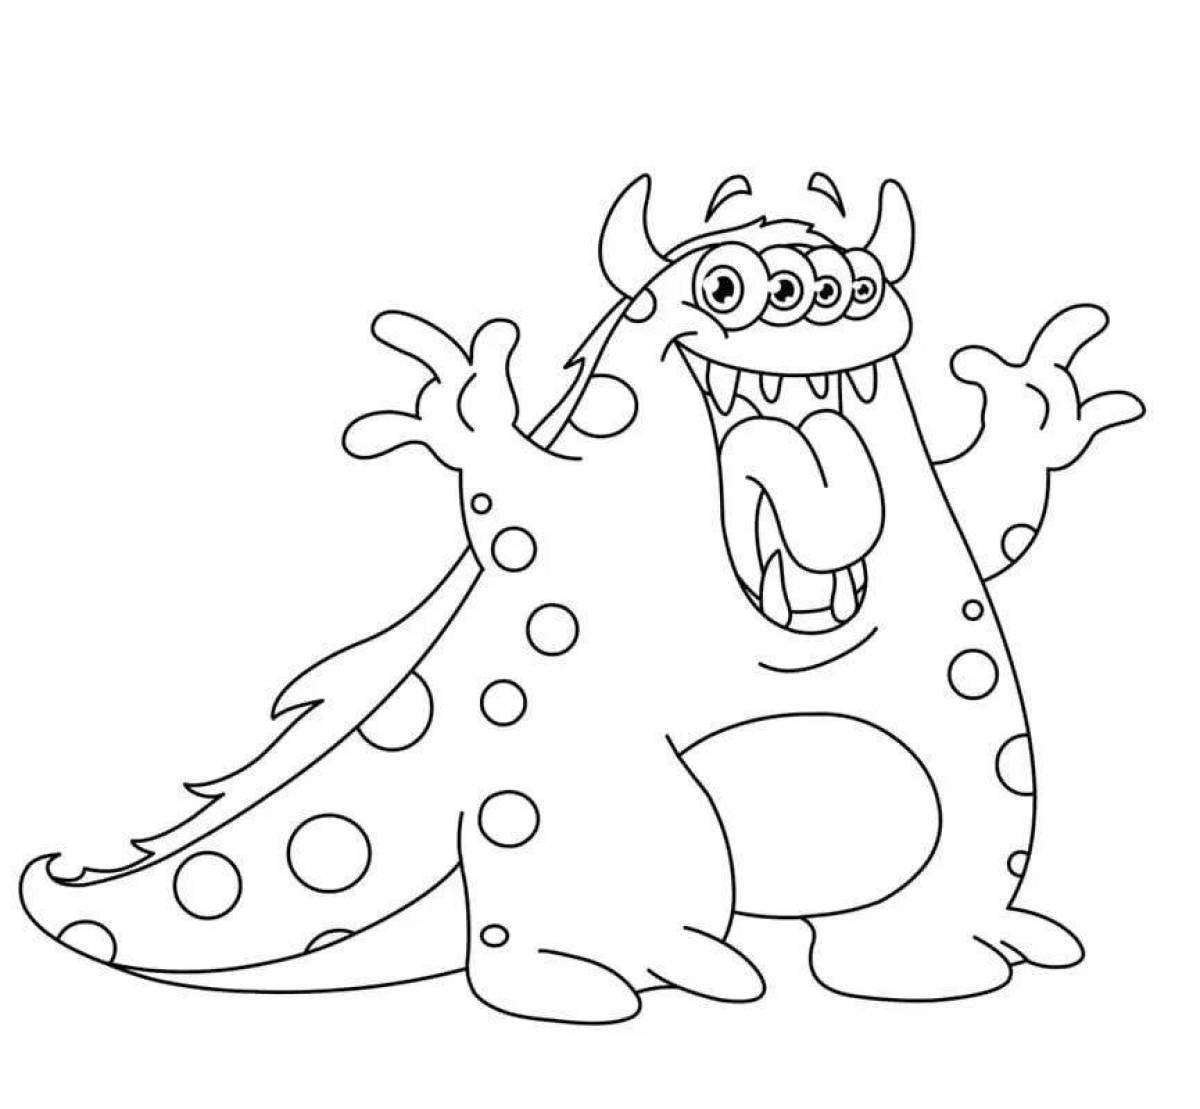 Cute blue monster coloring page